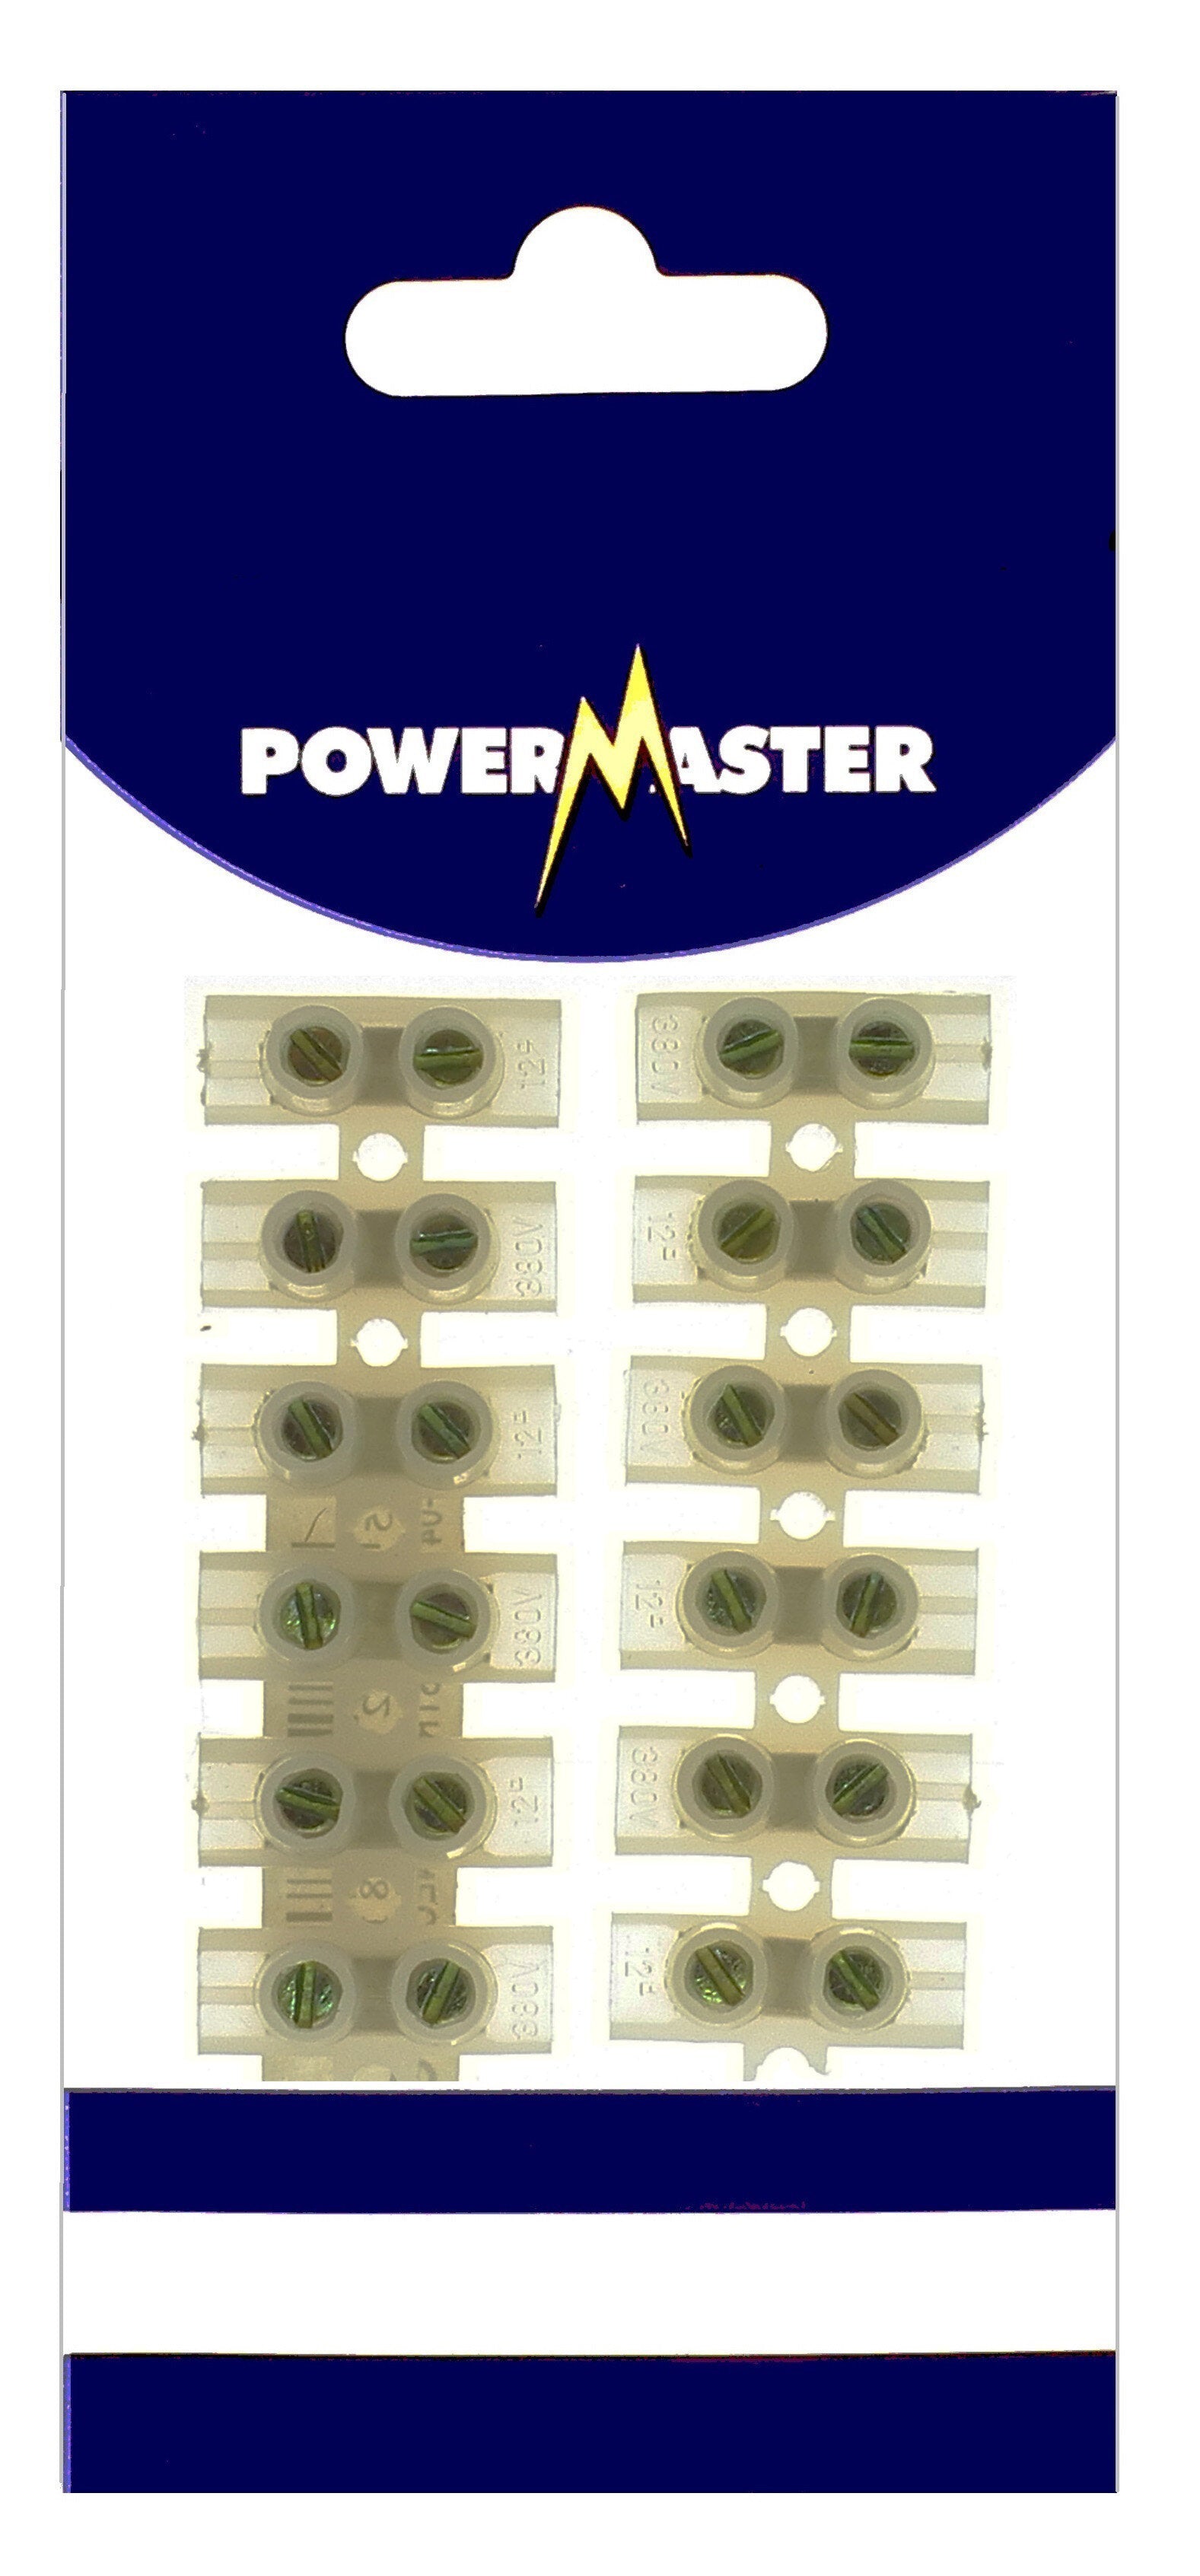 Electrical | Powermaster Strip Connect - 15 Amp by Weirs of Baggot St